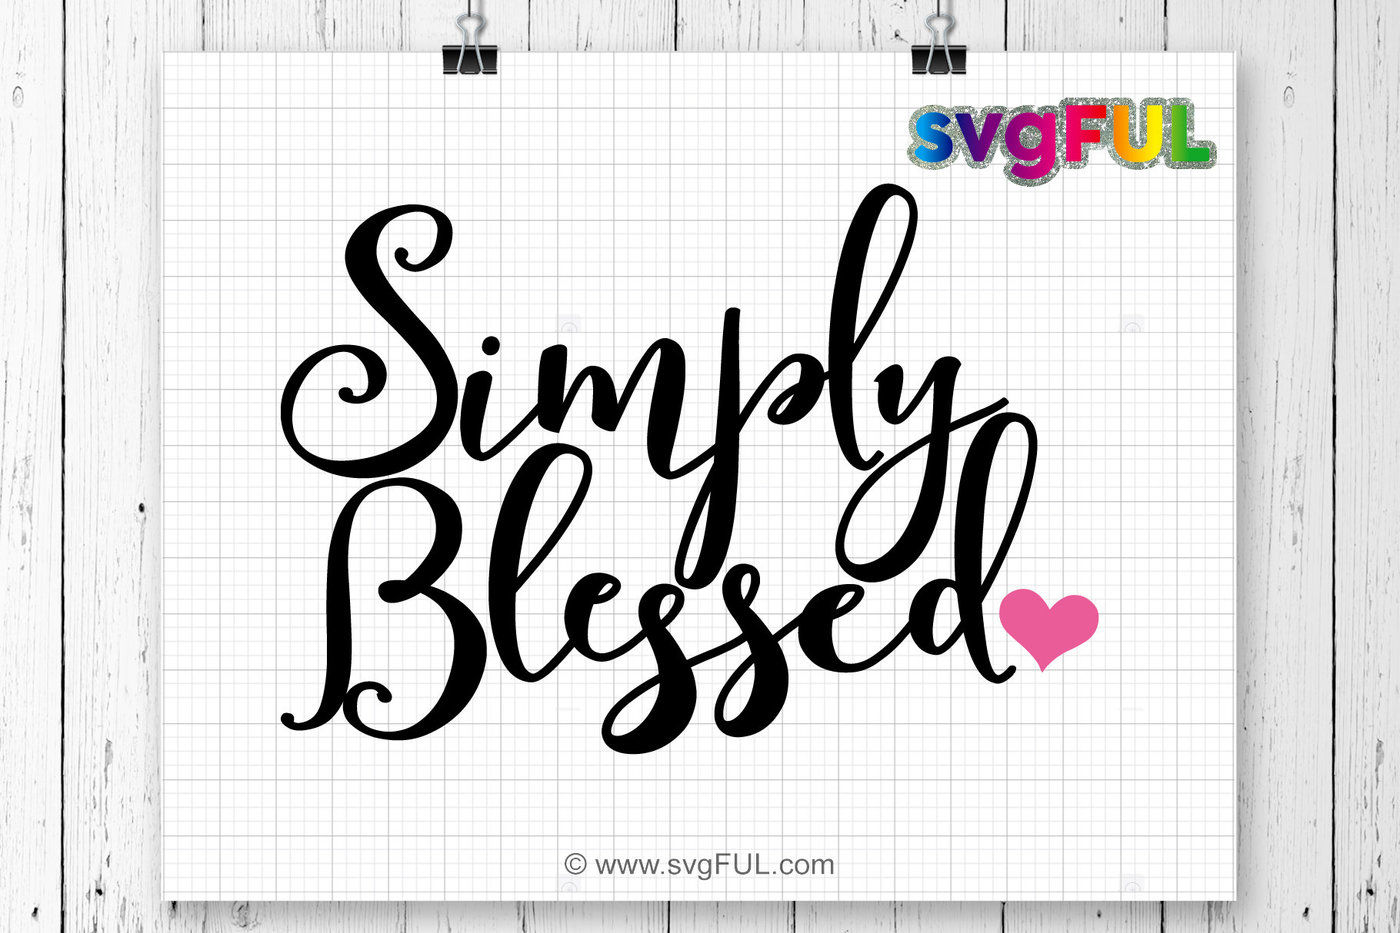 Simply Blessed Svg, Blessed Svg, Religious SVG, Quotes Svg ...